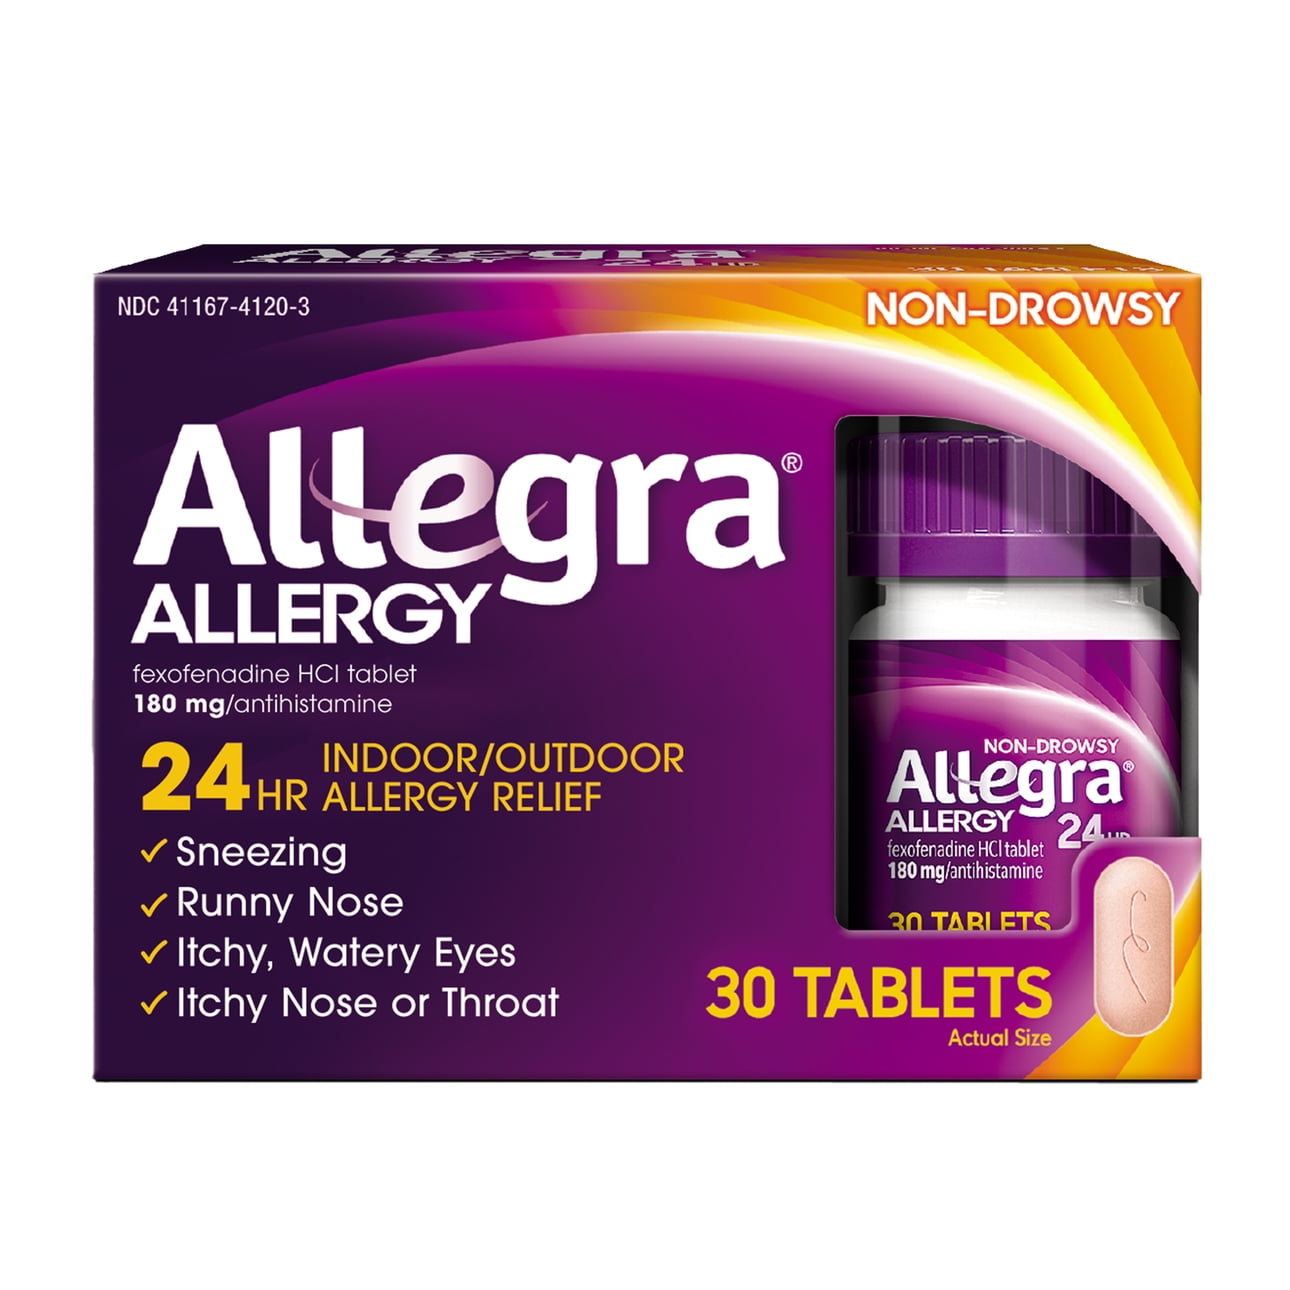 Allegra 24 Hour Non-Drowsy Antihistamine Medicine Tablets for Adult Allergy Relief, Fexofenadine, 180 mg, 30 Pills - image 1 of 7